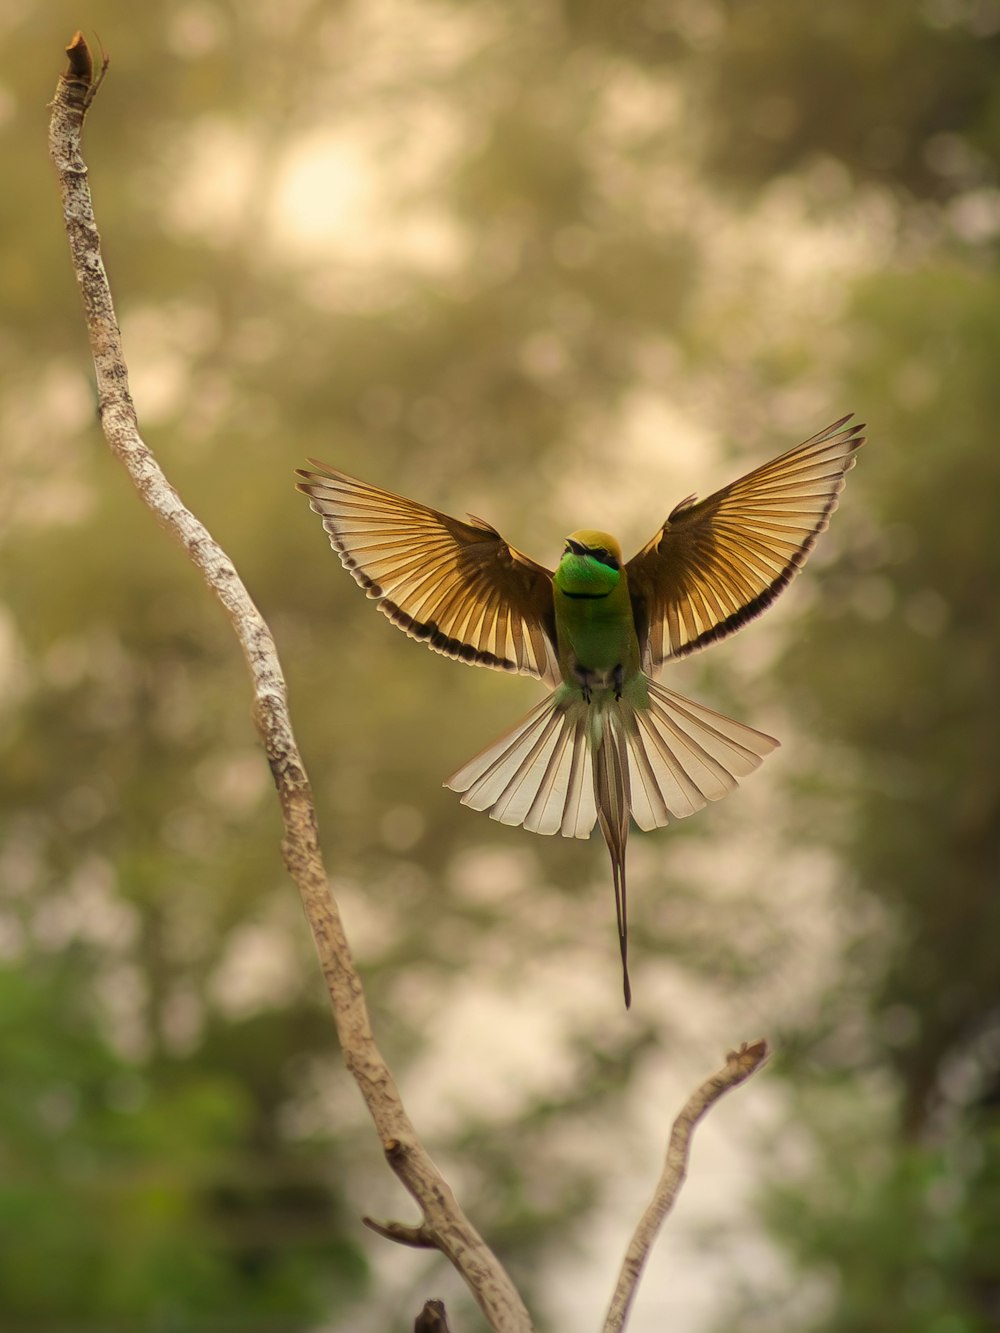 a green bird with its wings spread out on a tree branch